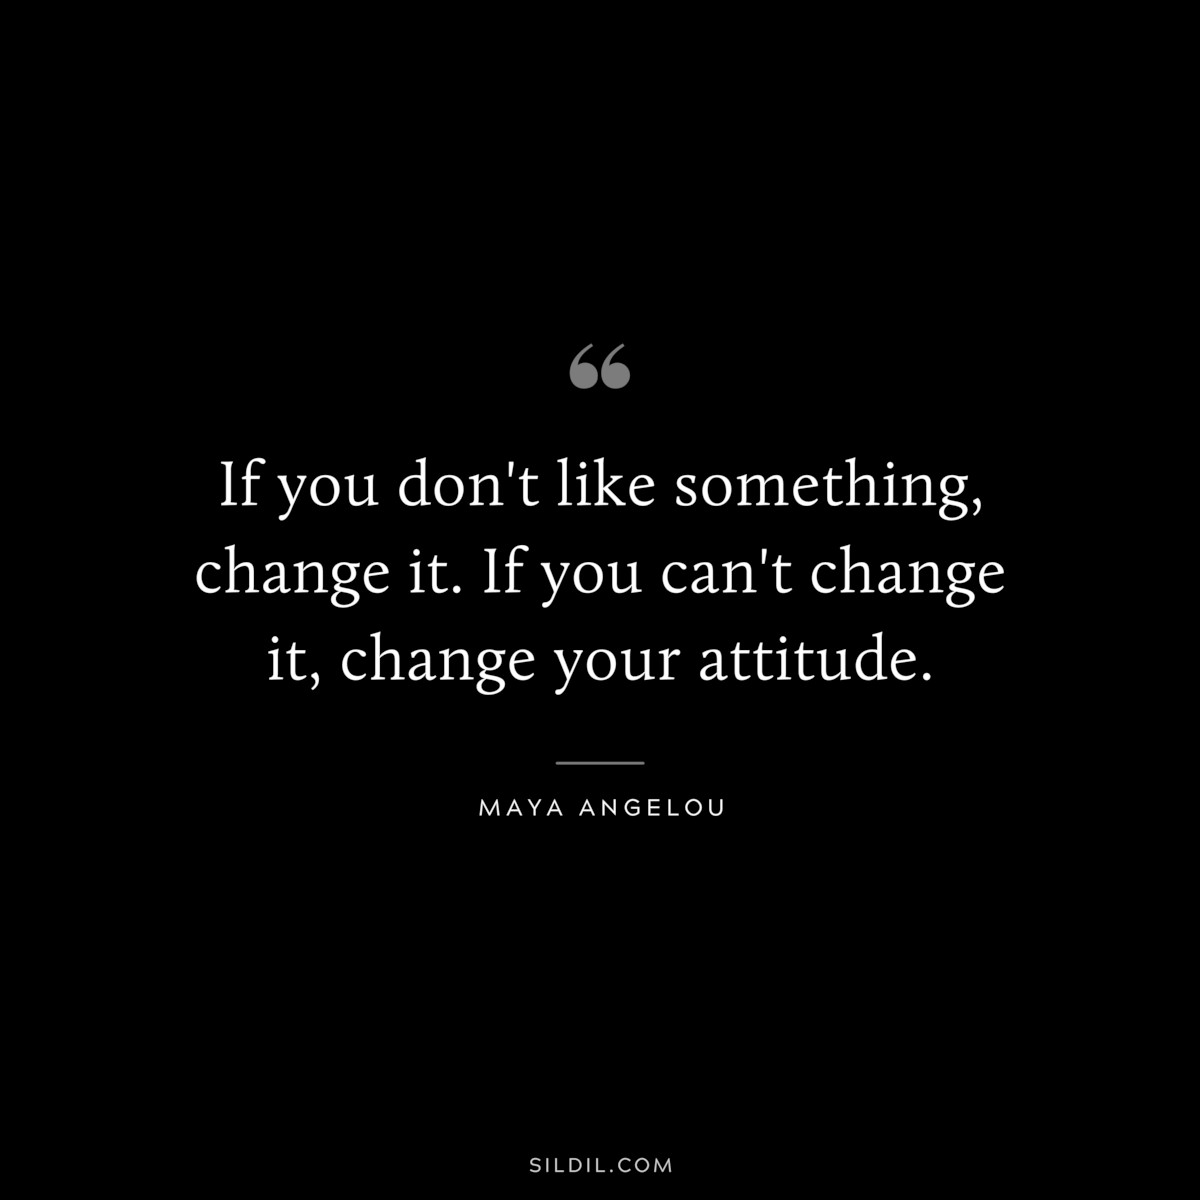 If you don't like something, change it. If you can't change it, change your attitude. ― Maya Angelou